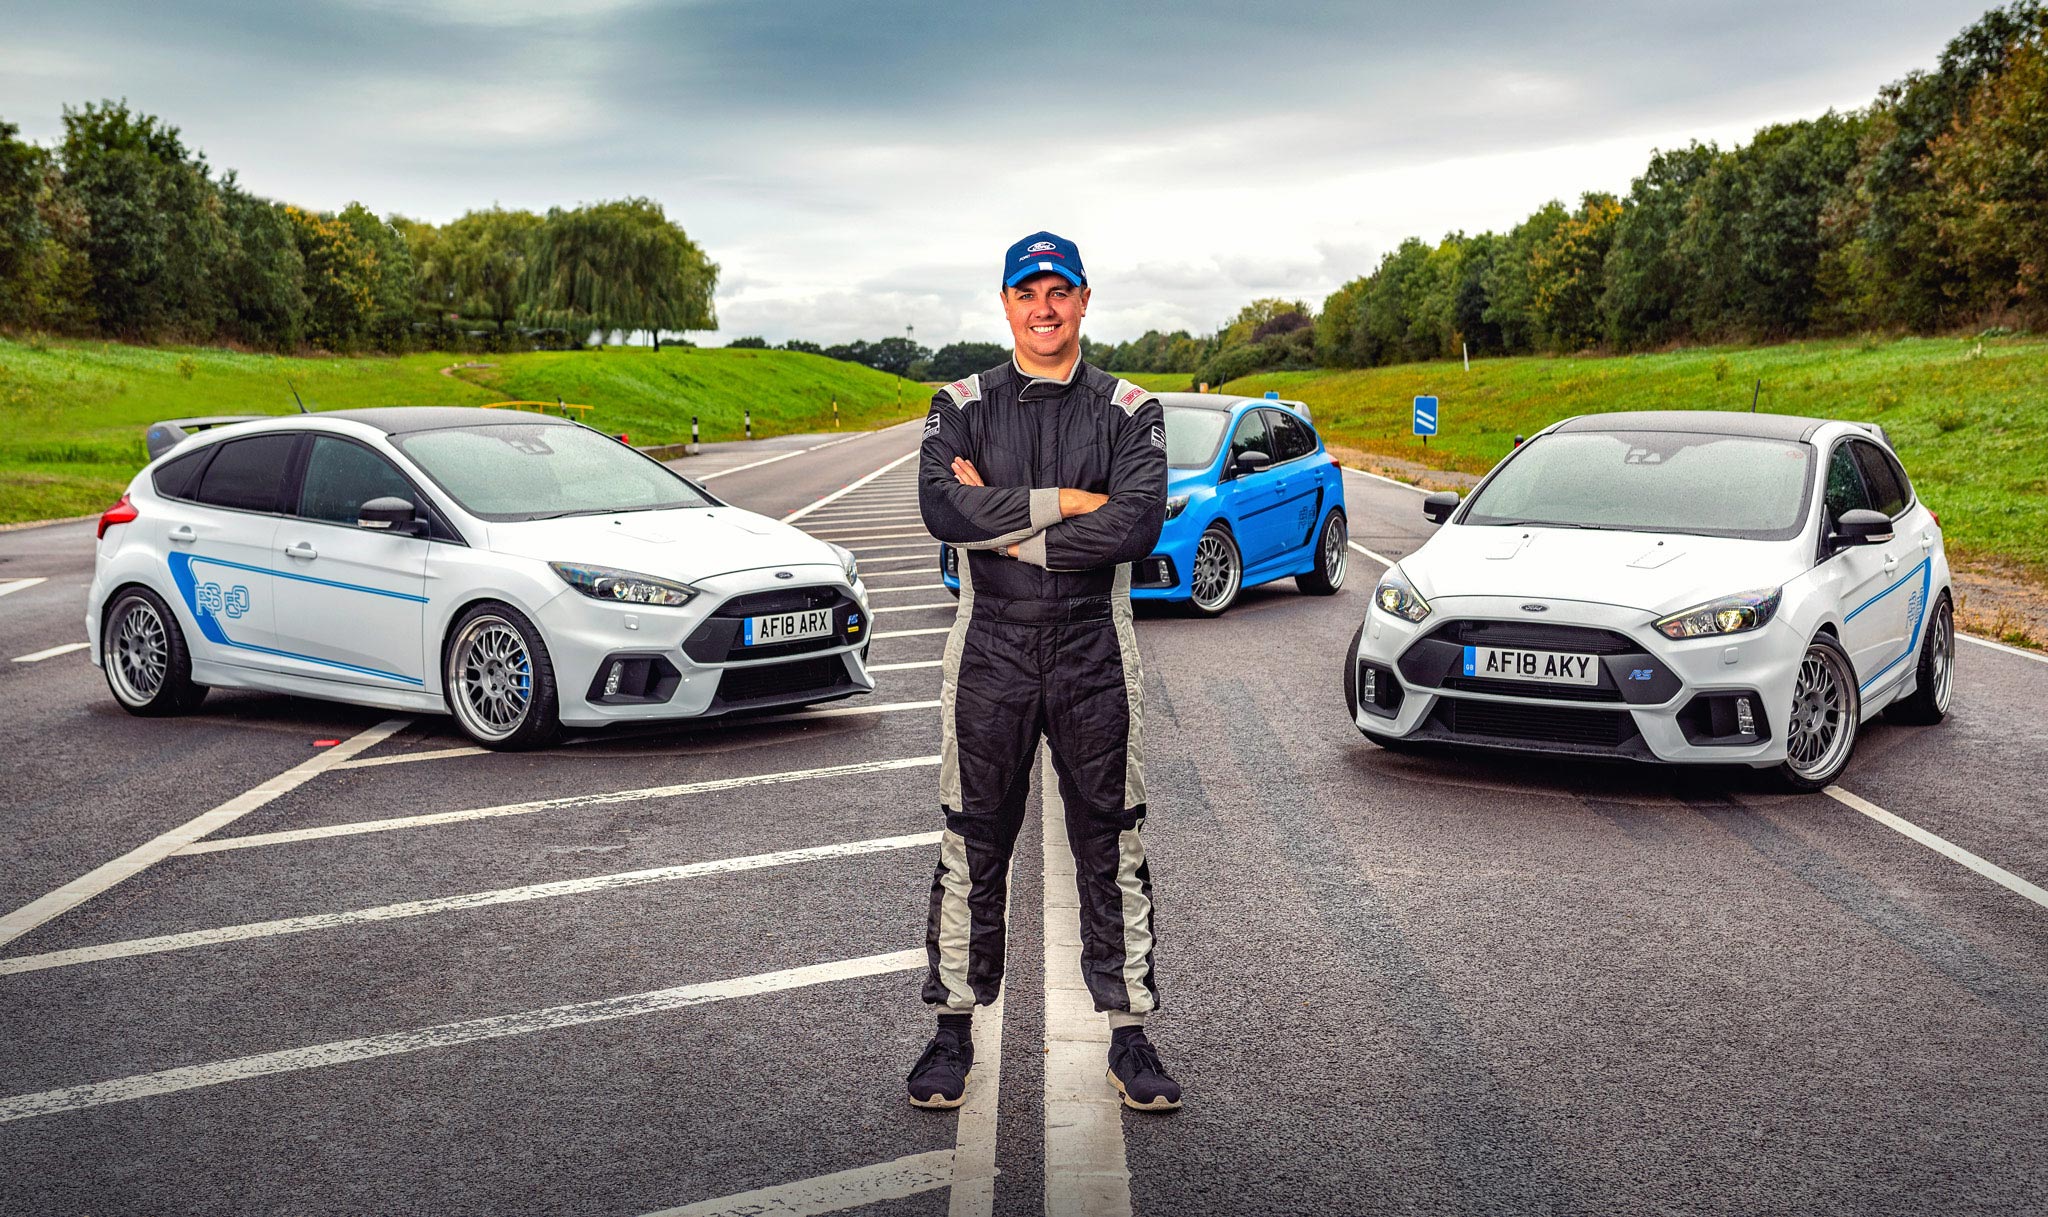 A compelling portrait captured by Wright Content, showcasing a professional driver in his racing jumpsuit and cap, standing with arms crossed against the backdrop of three Fiesta RS sports cars at Ford's test track. This image embodies the spirit of athleticism and performance, expertly documented by Wright Content, your premier sports personality photographer.